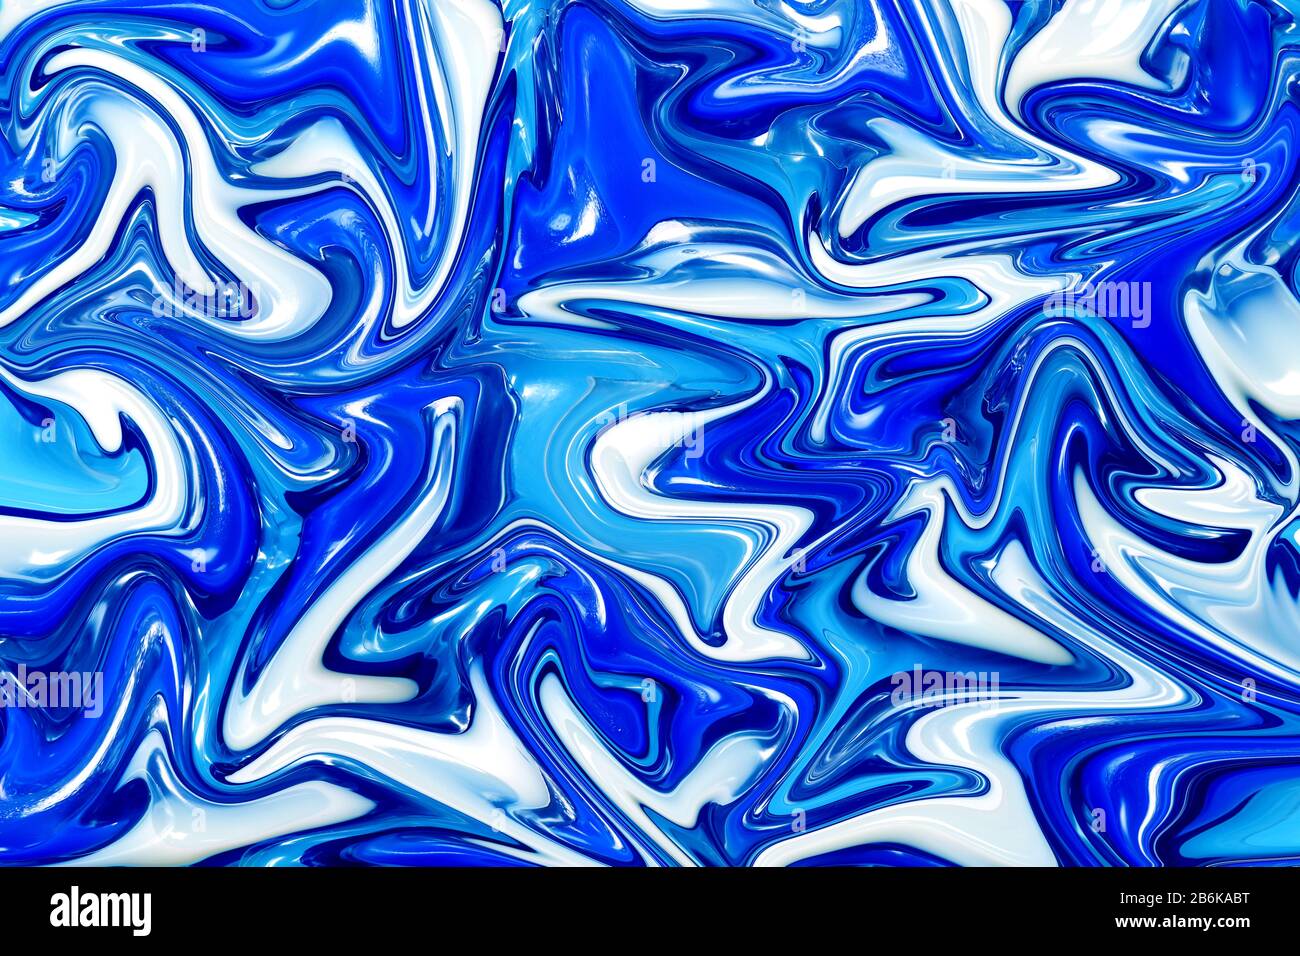 Blue liquid marbling paint swirls background. Fluid painting abstract texture. Stock Photo